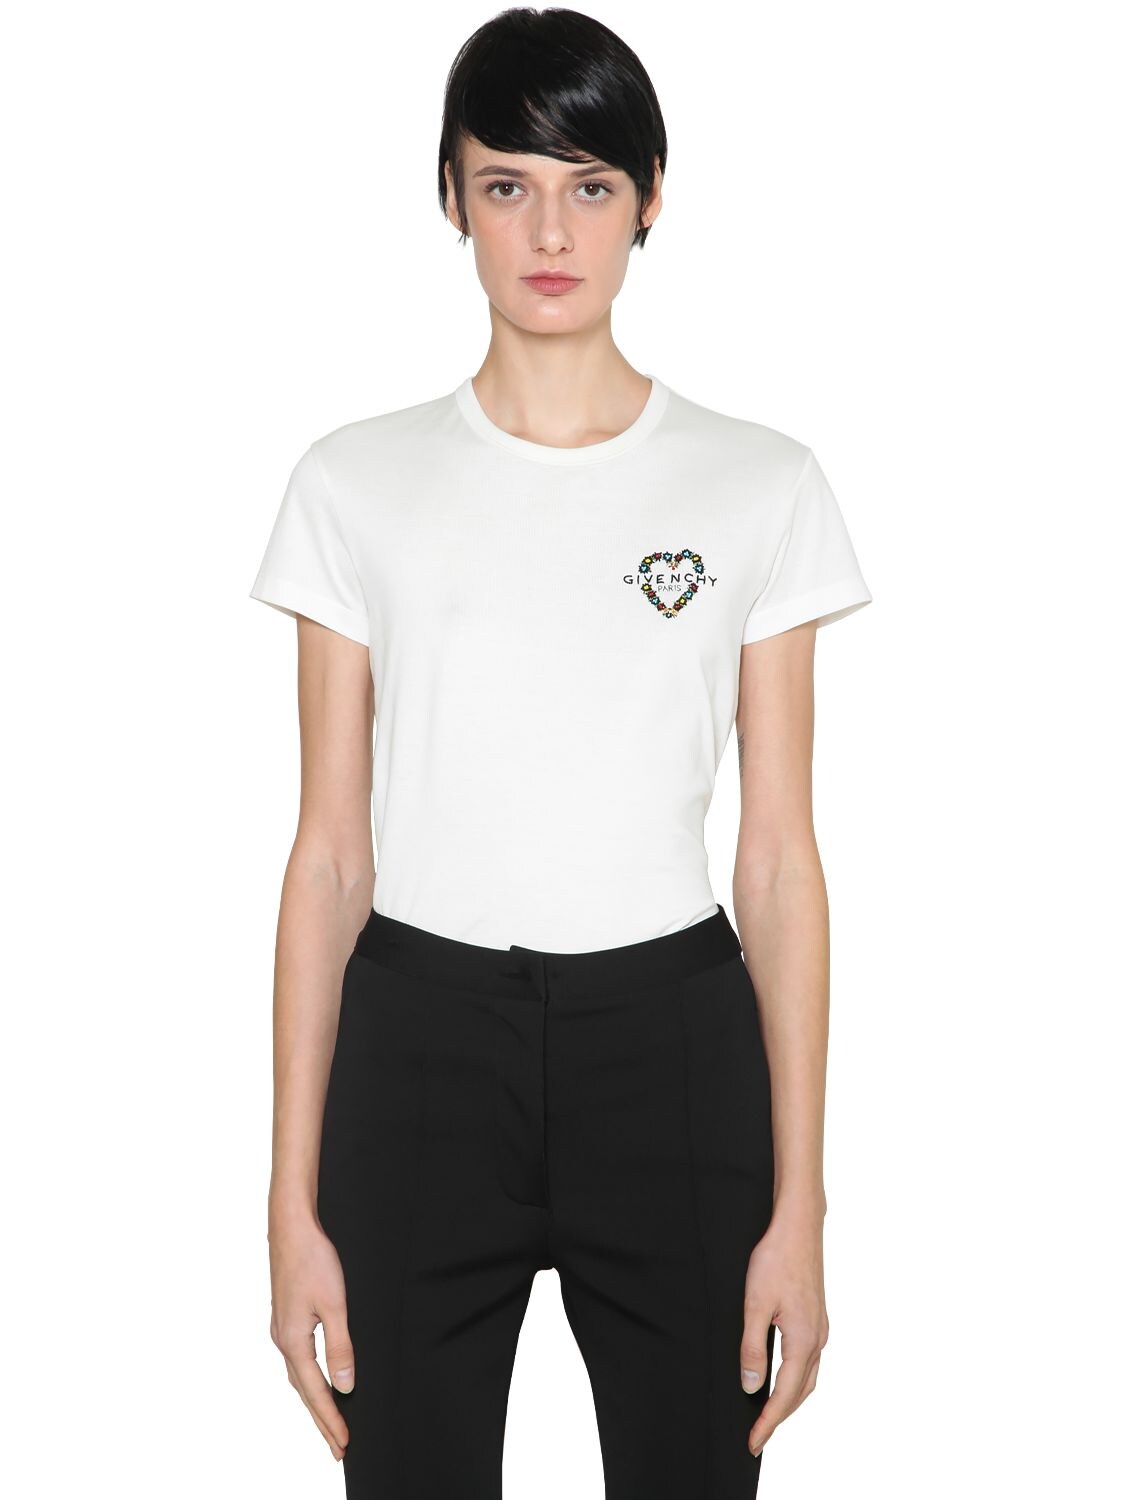 GIVENCHY LOGO EMBROIDERED COTTON JERSEY T-SHIRT,69ID19027-MTAW0